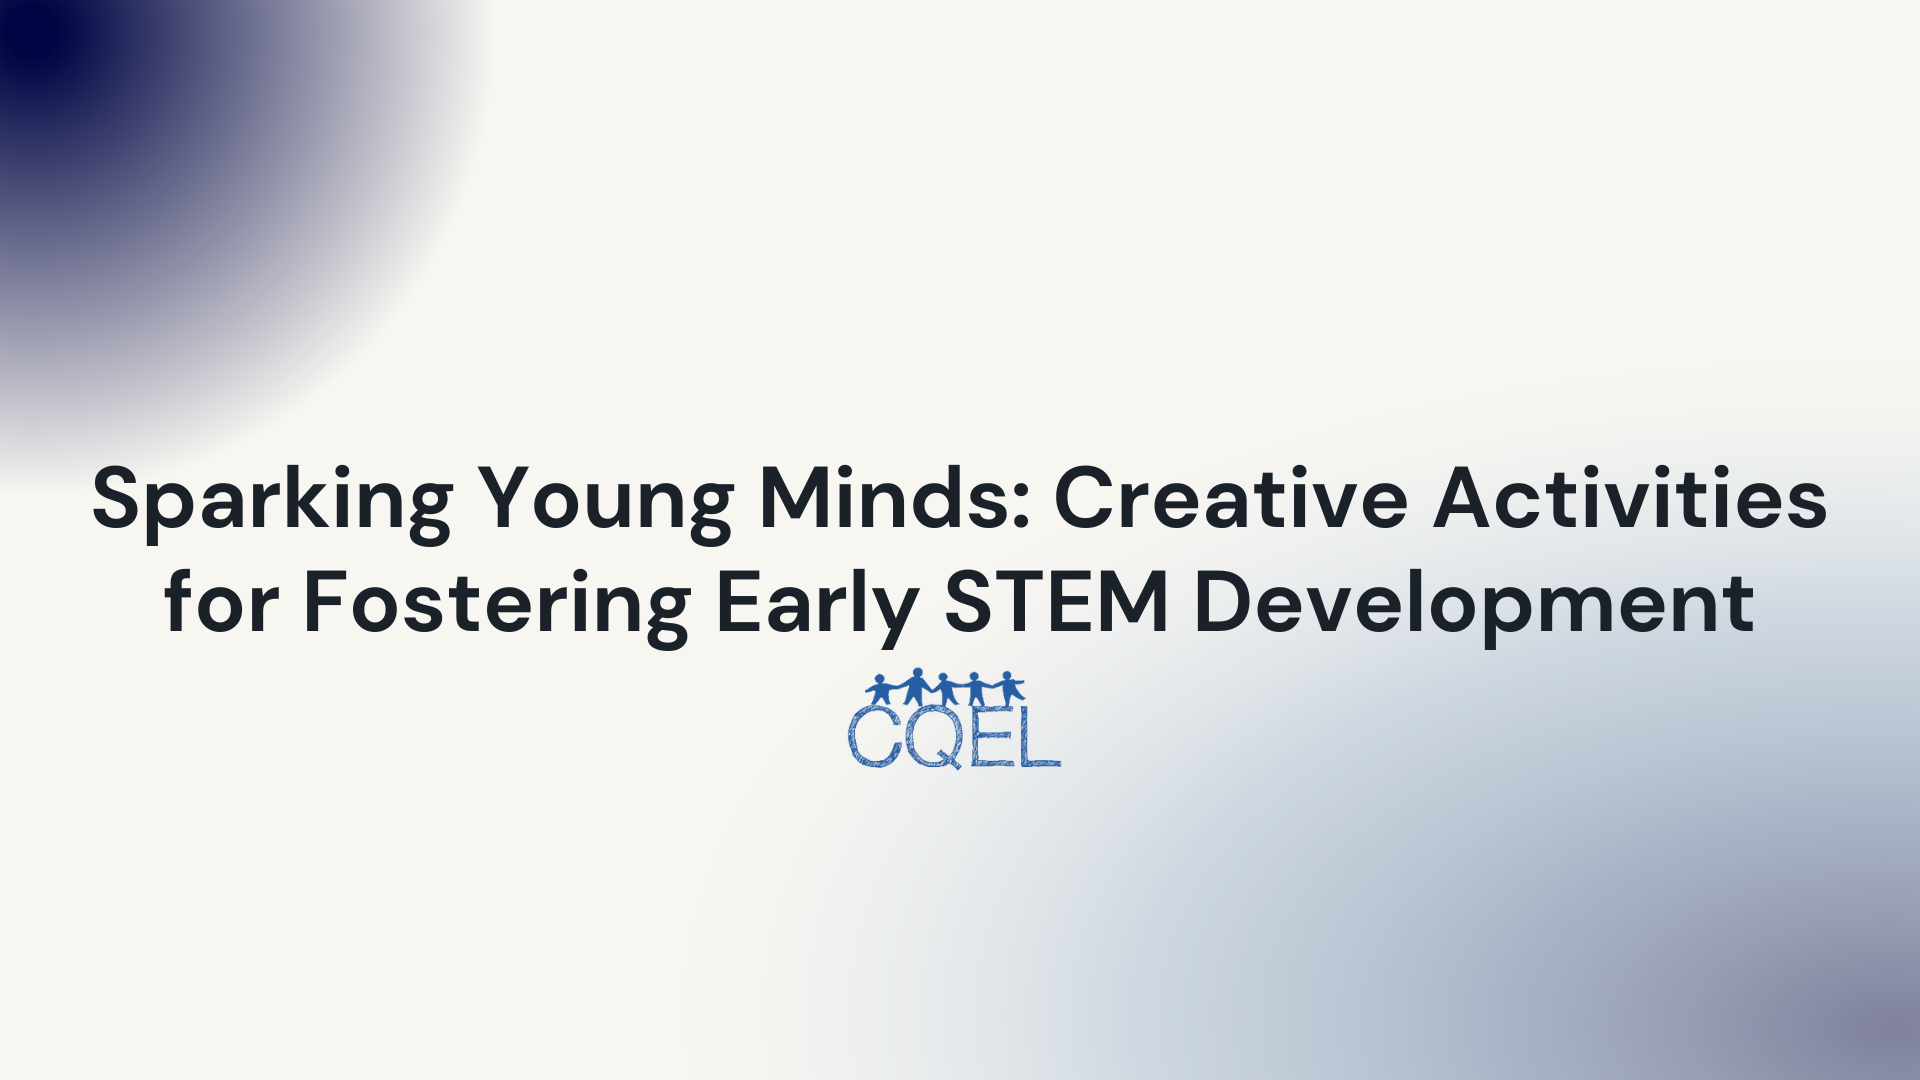 Sparking Young Minds: Creative Activities for Fostering Early STEM Development